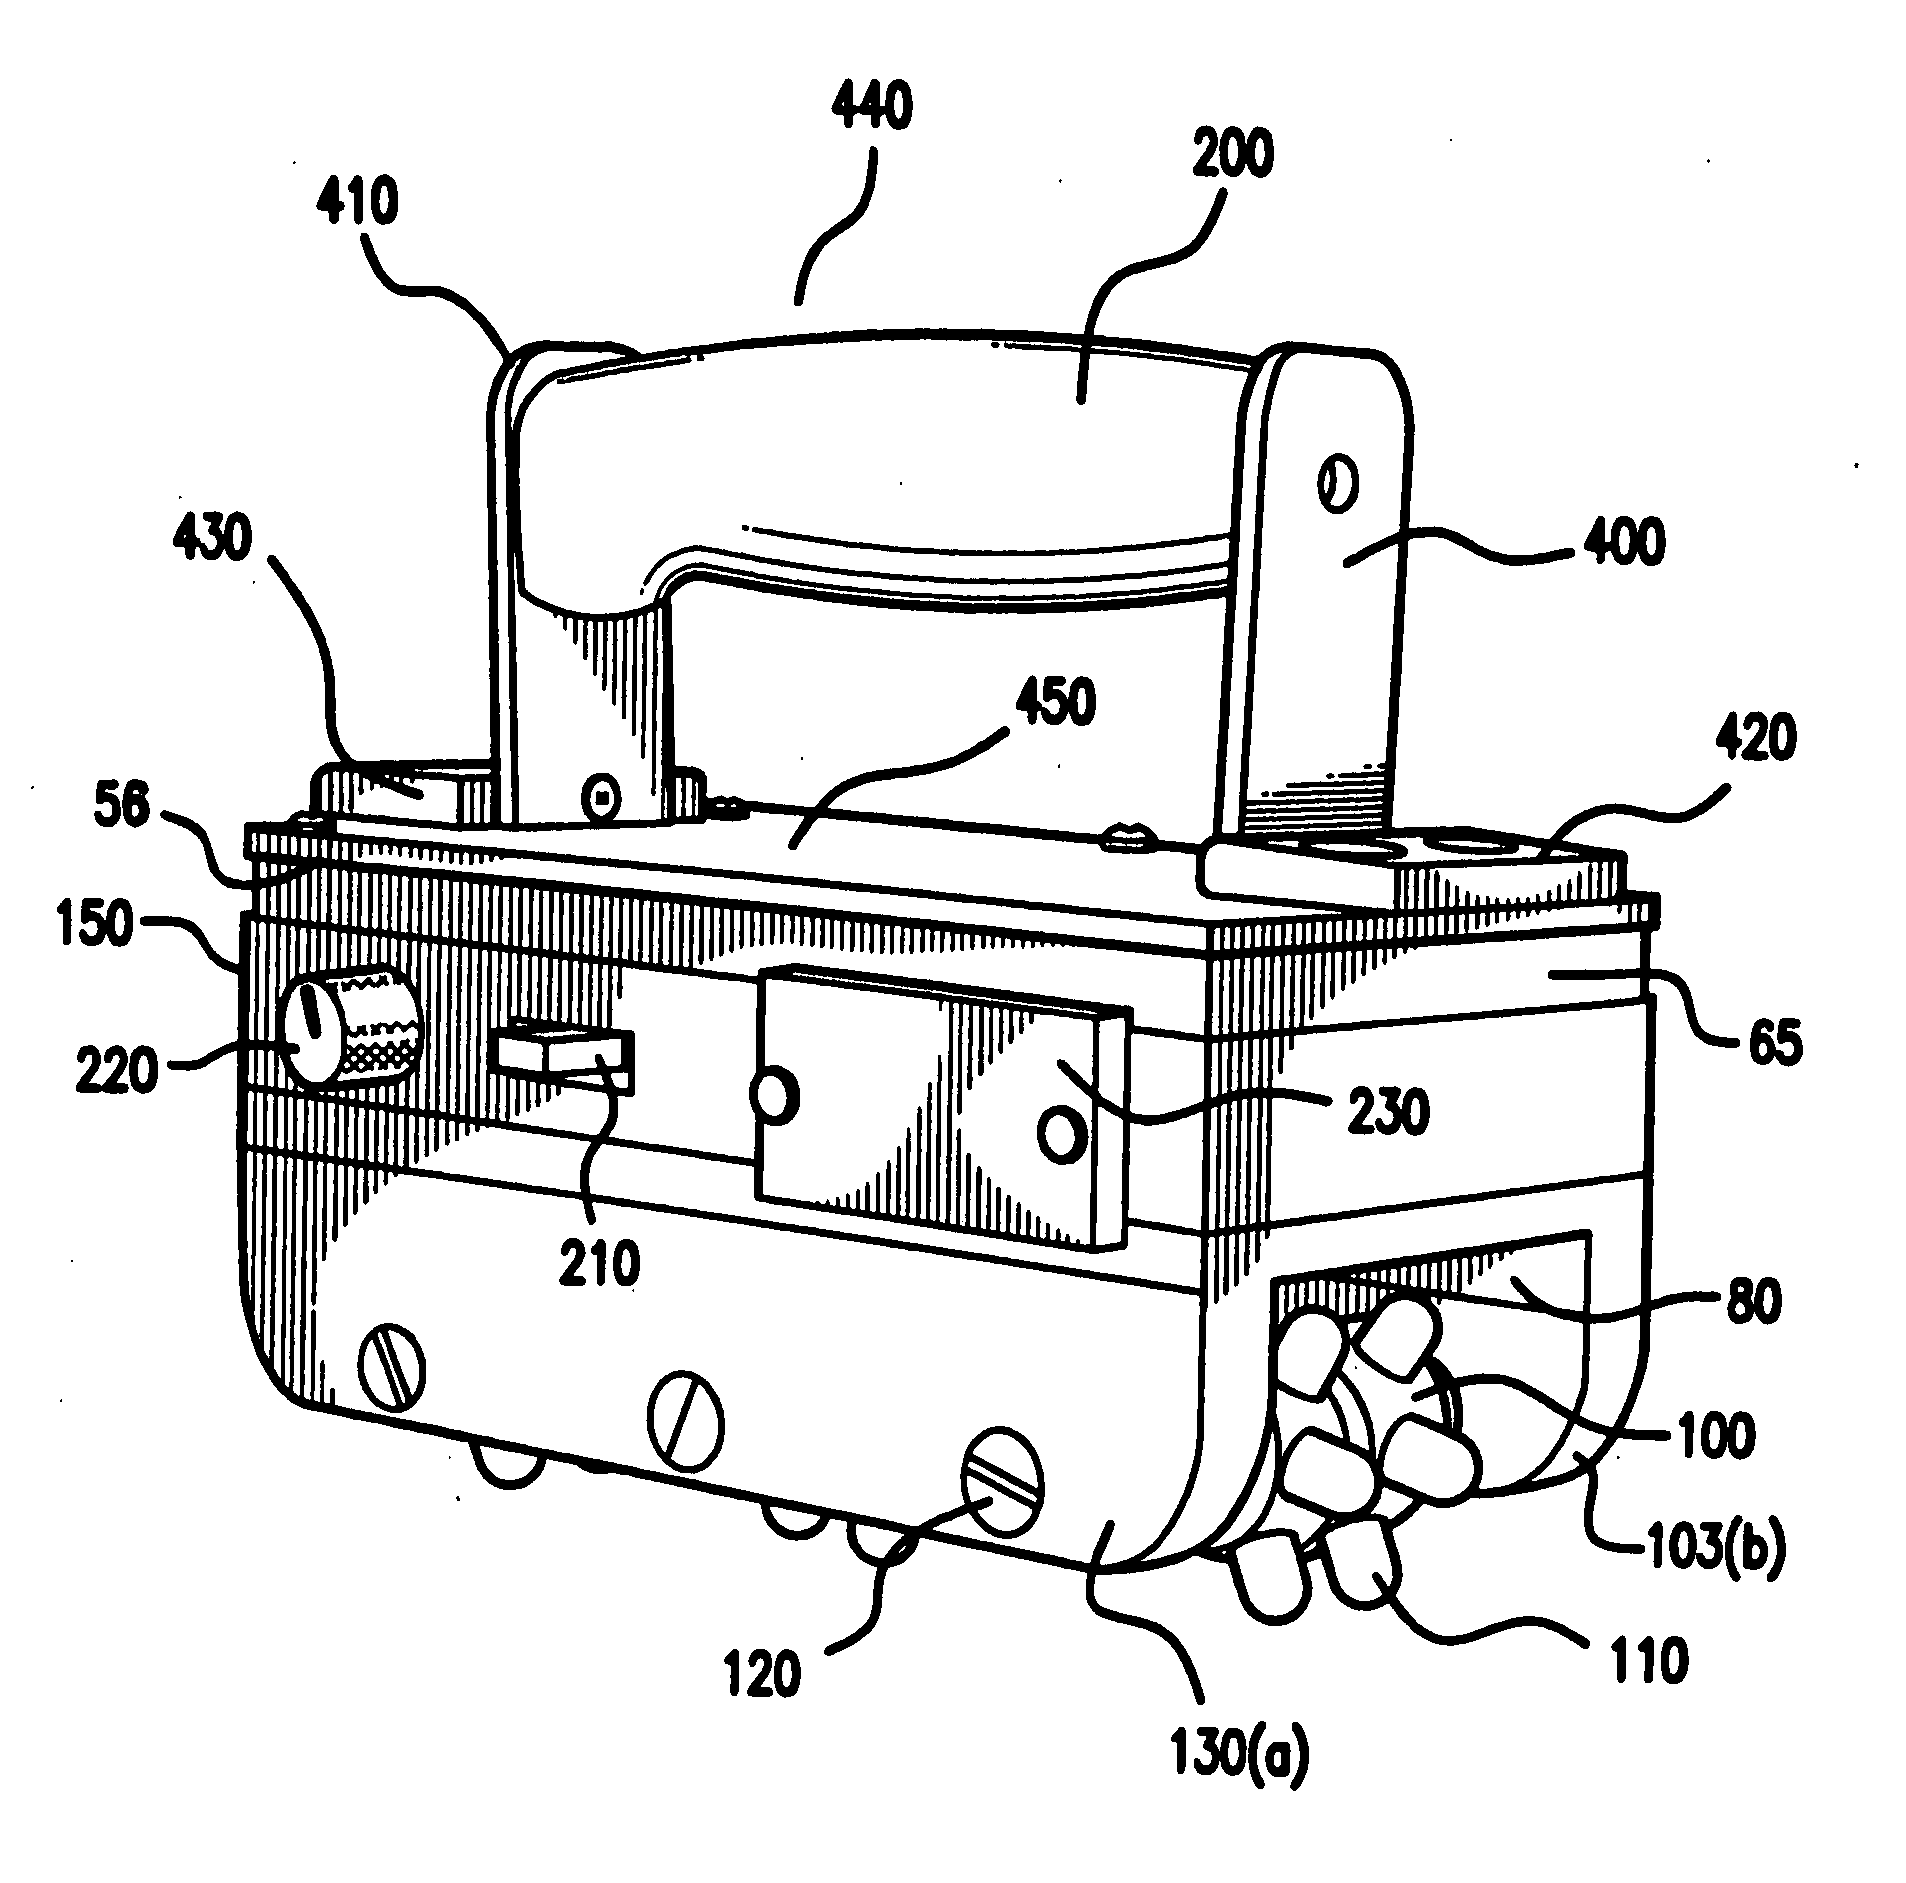 Apparatus for skin and muscle treatment